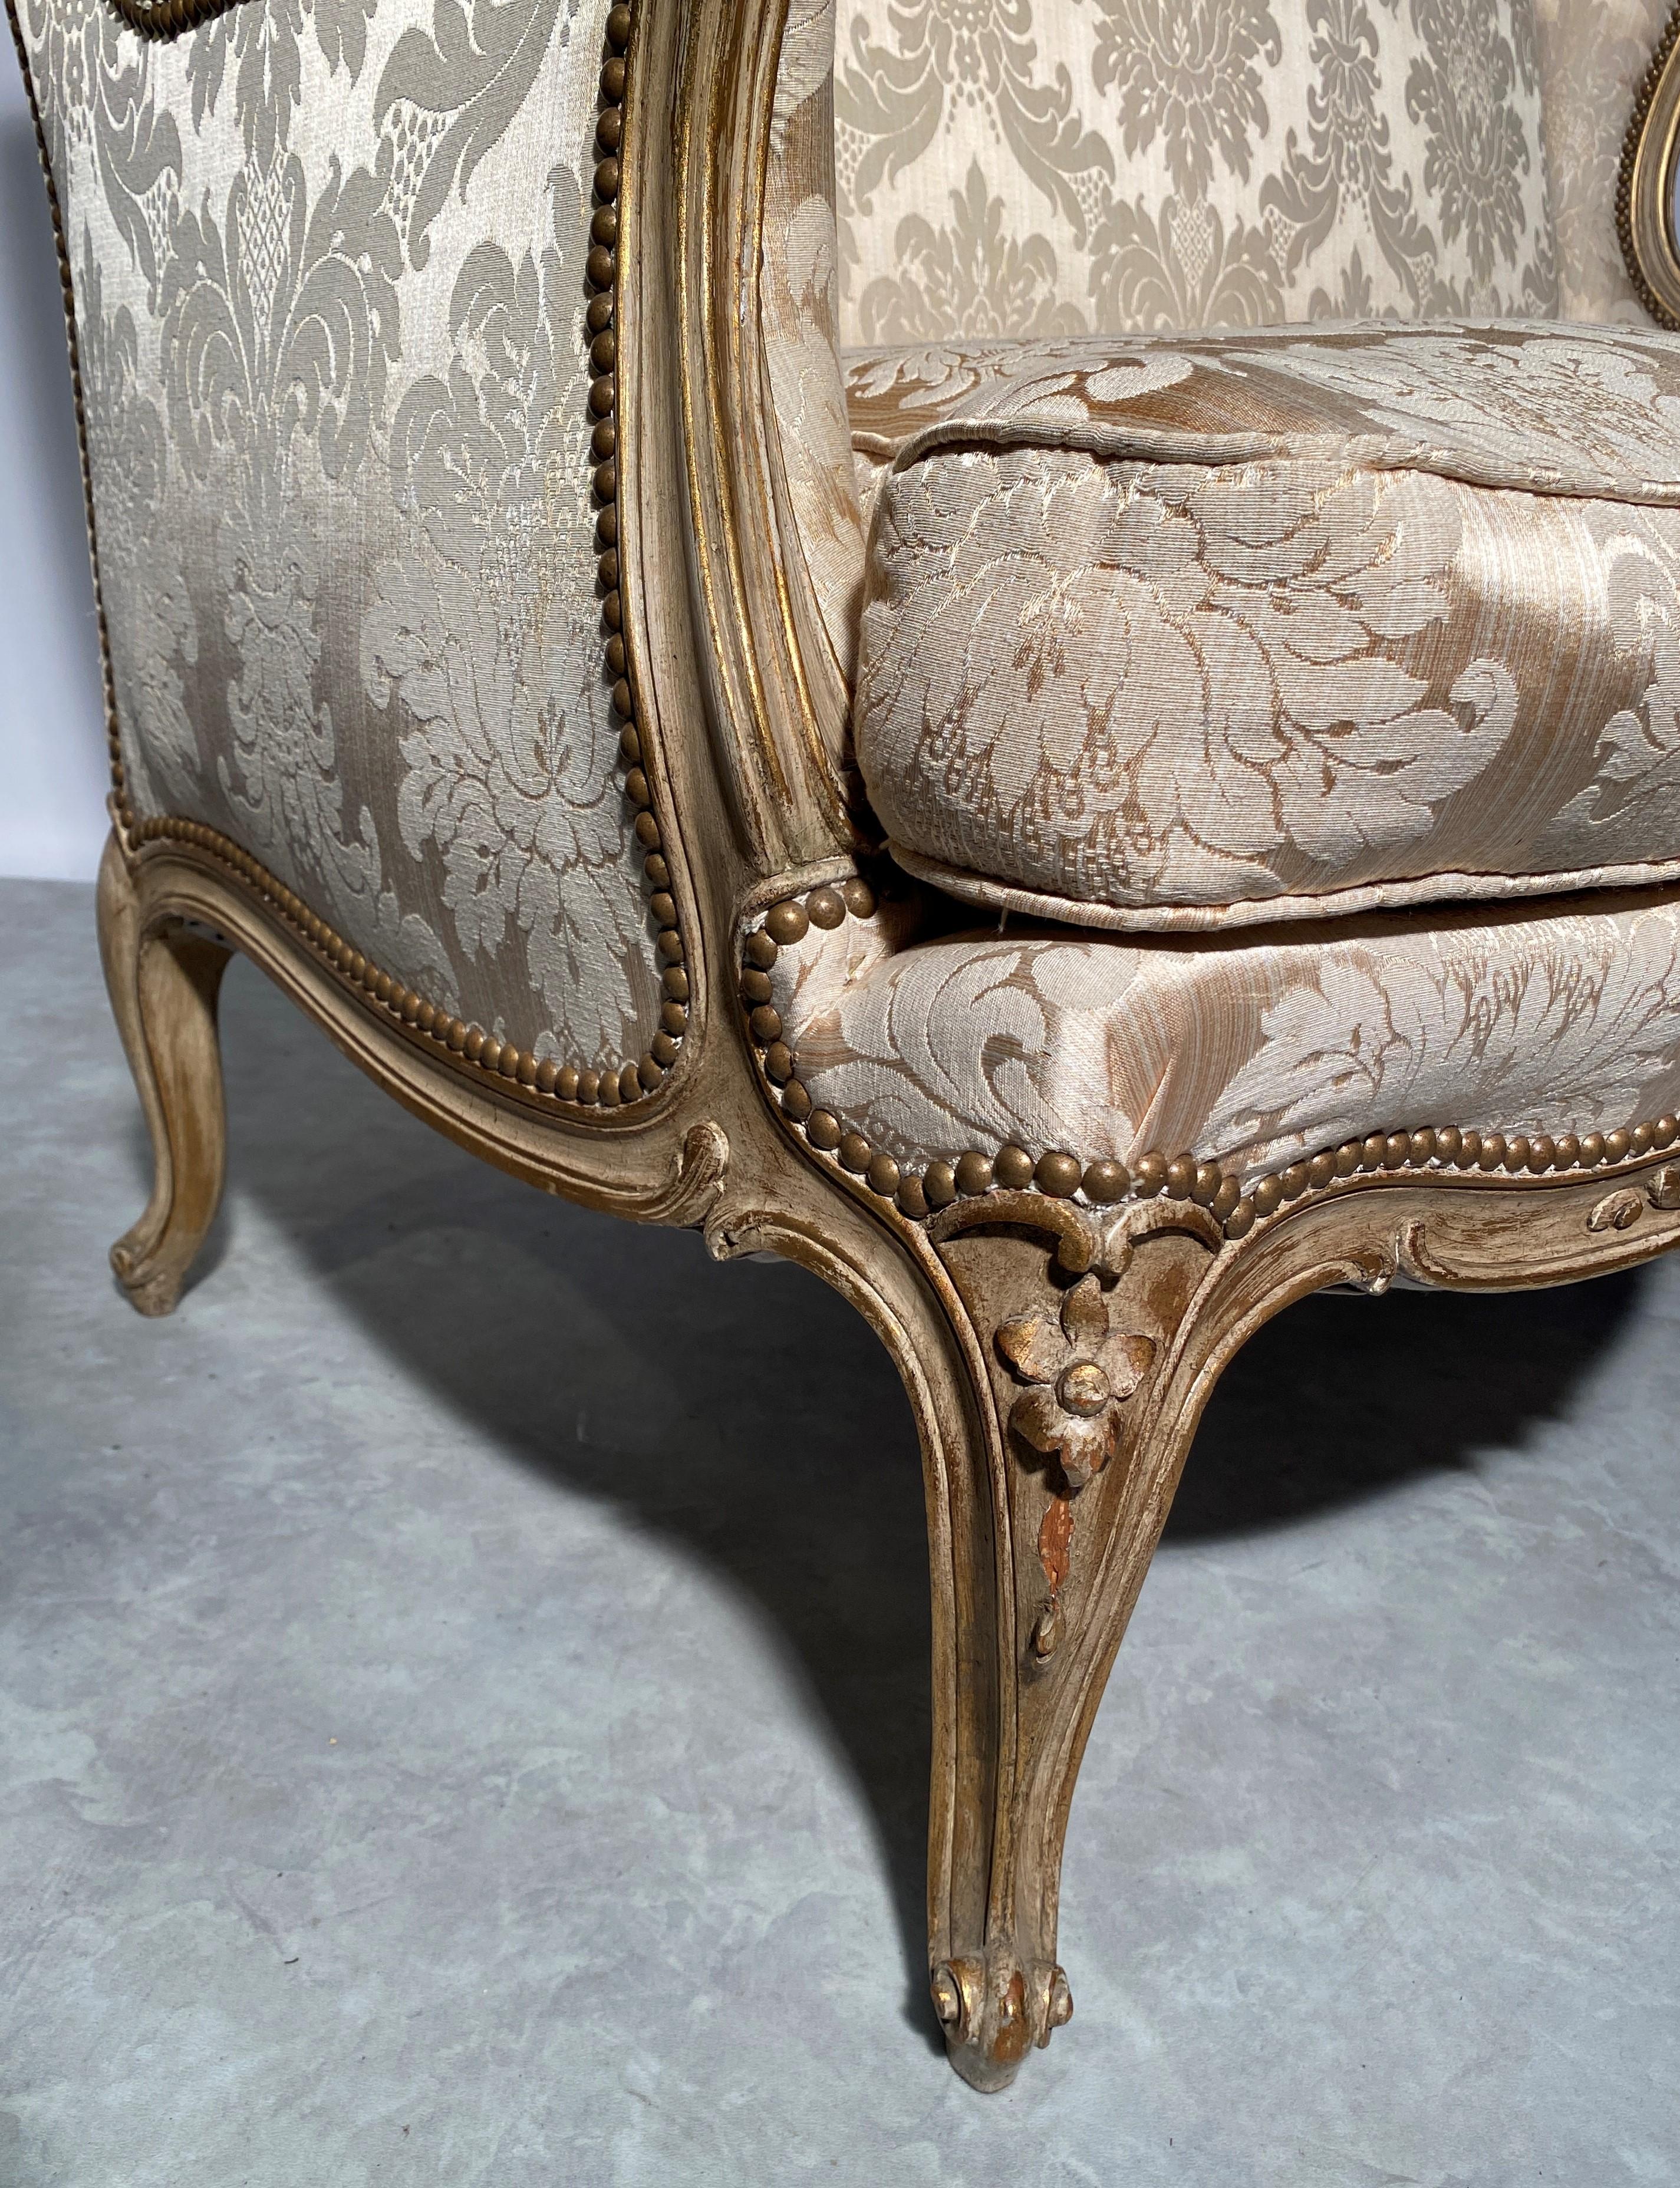 Giltwood Sofa In Molded Wood And Carved With Flowers France Louis XV Style For Sale